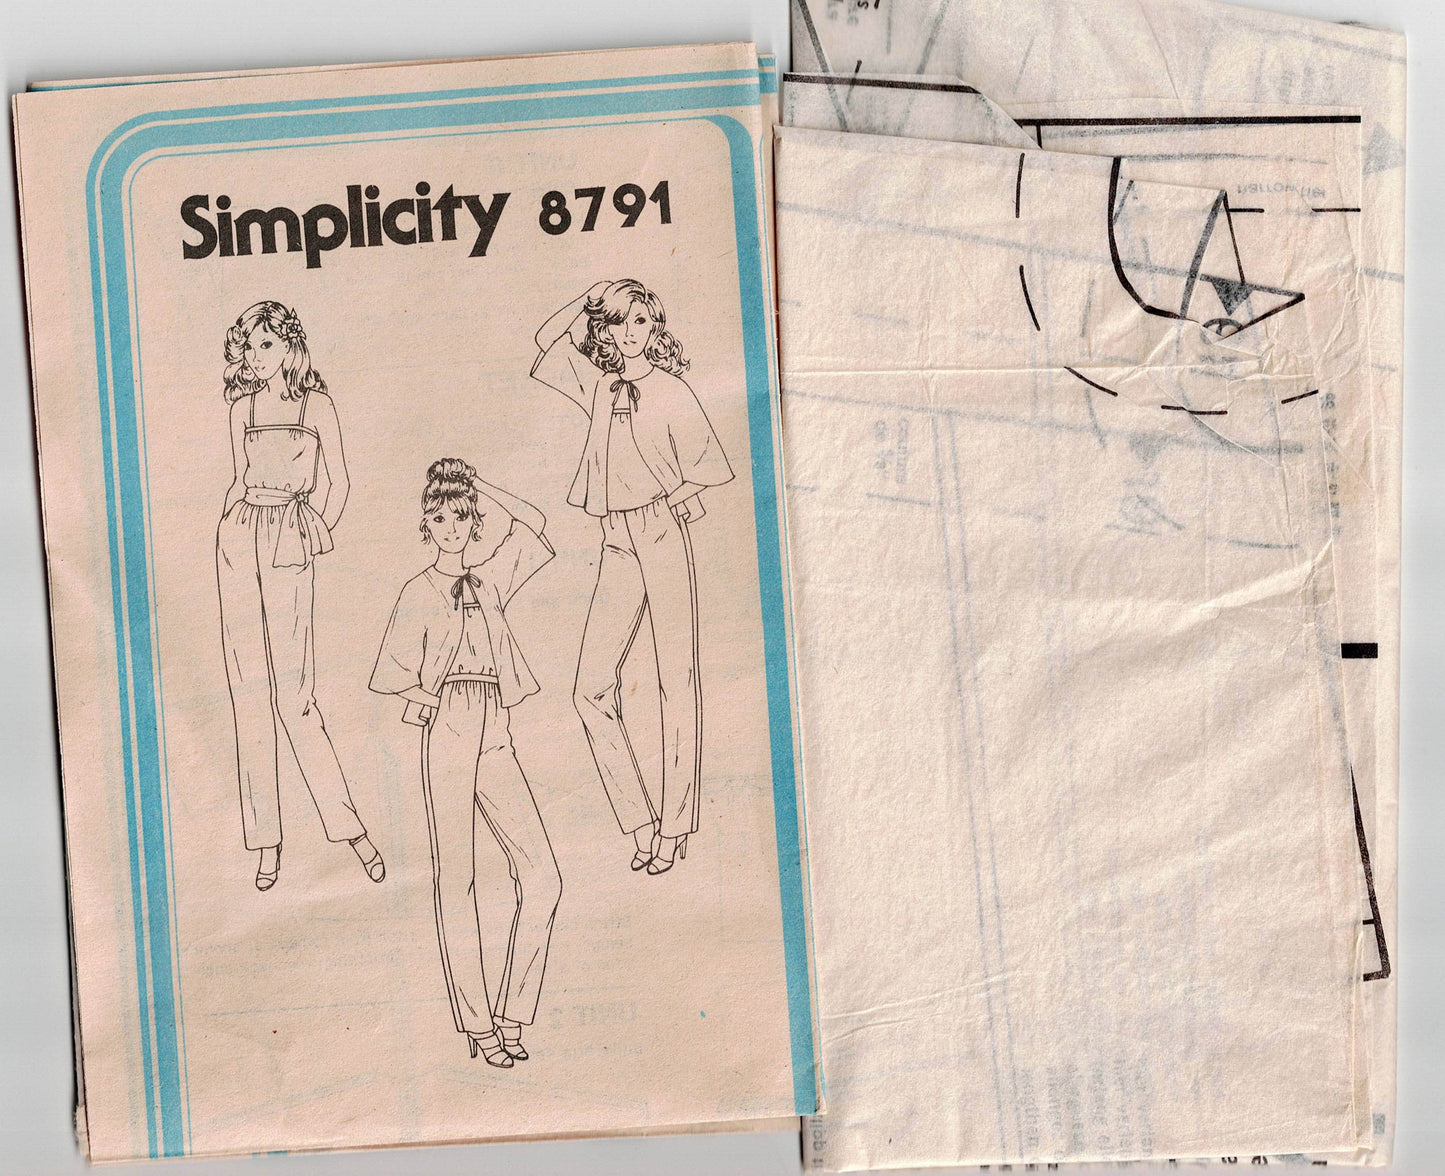 Simplicity 8791 Womens Disco Style Camisole Kimono Jacket Pants & Sash 1970s Vintage Sewing Pattern Size 14 Bust 36 inches